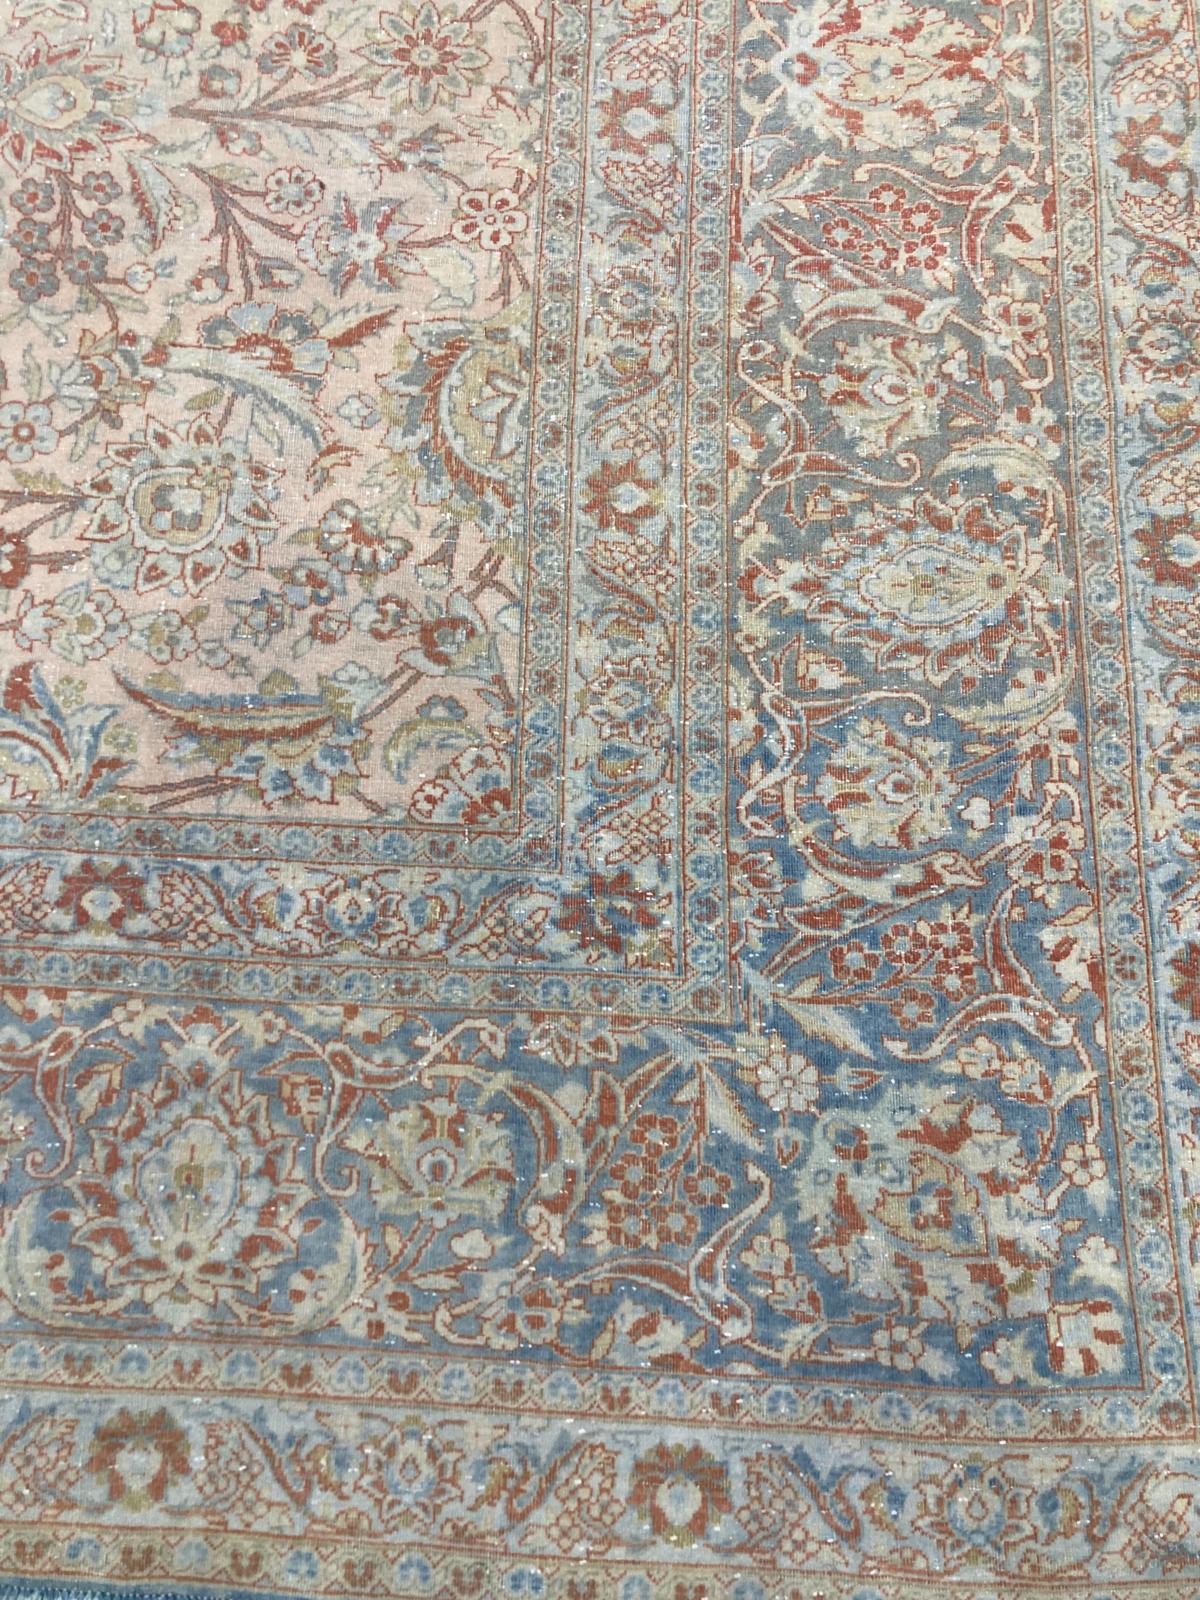 Antique, Fine Persian Mahal Rug 10’5 x 14’4 In Good Condition For Sale In Sag Harbor, NY